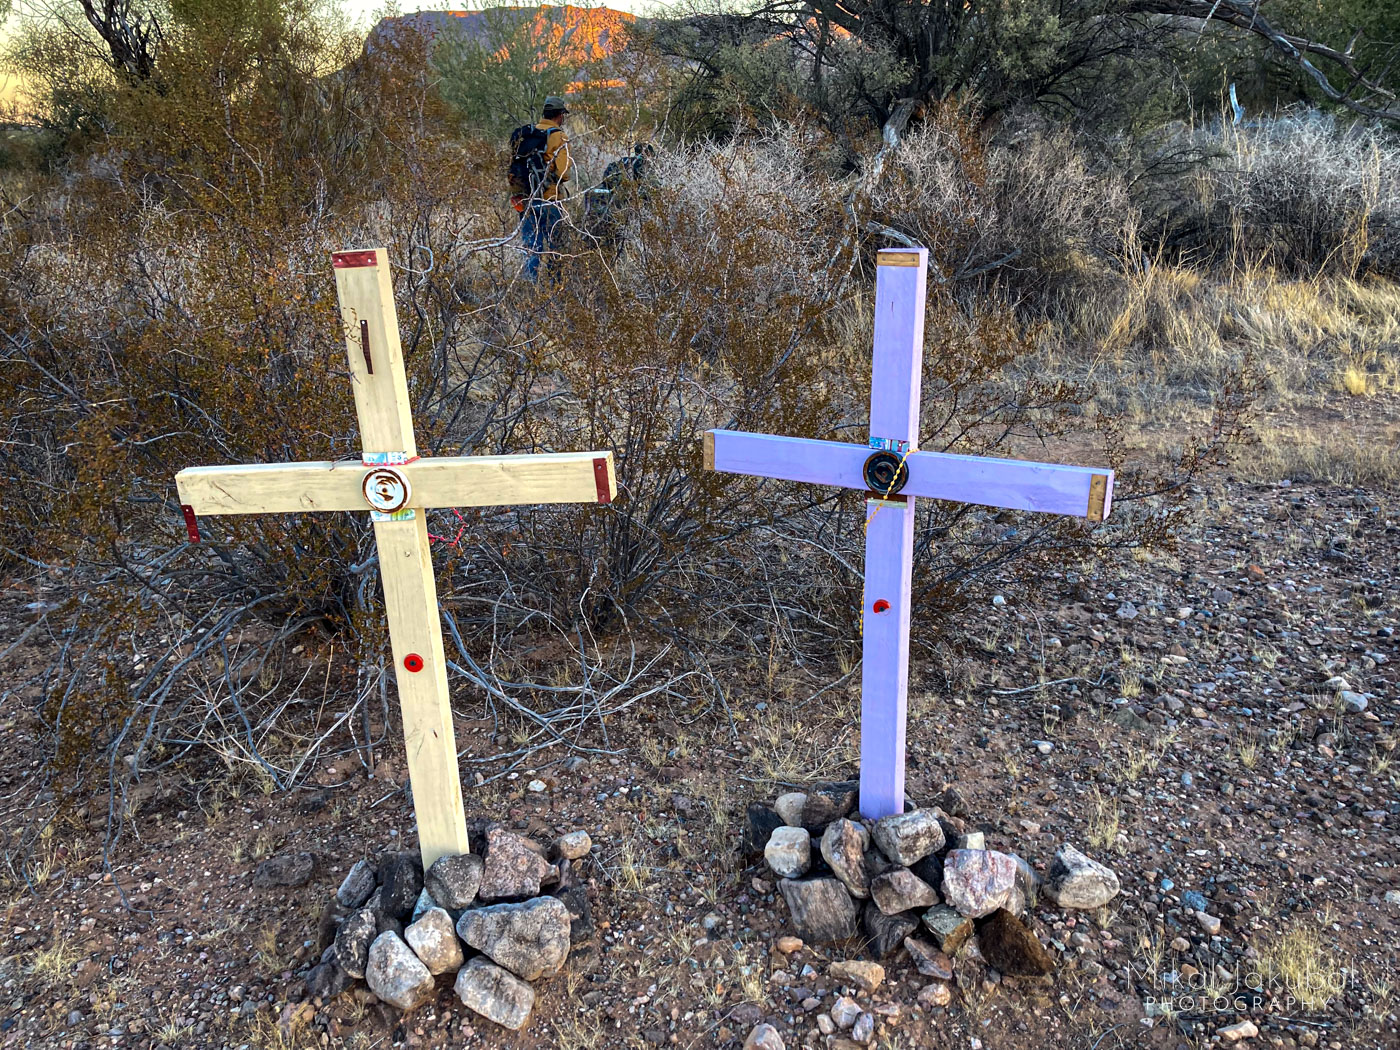 Two crosses, one yellow and one lavender, each about 3' tall and propped up with small piles of rocks are seen surrounded by desert scrub bushes. In the background, two hikers make their way through the brush.